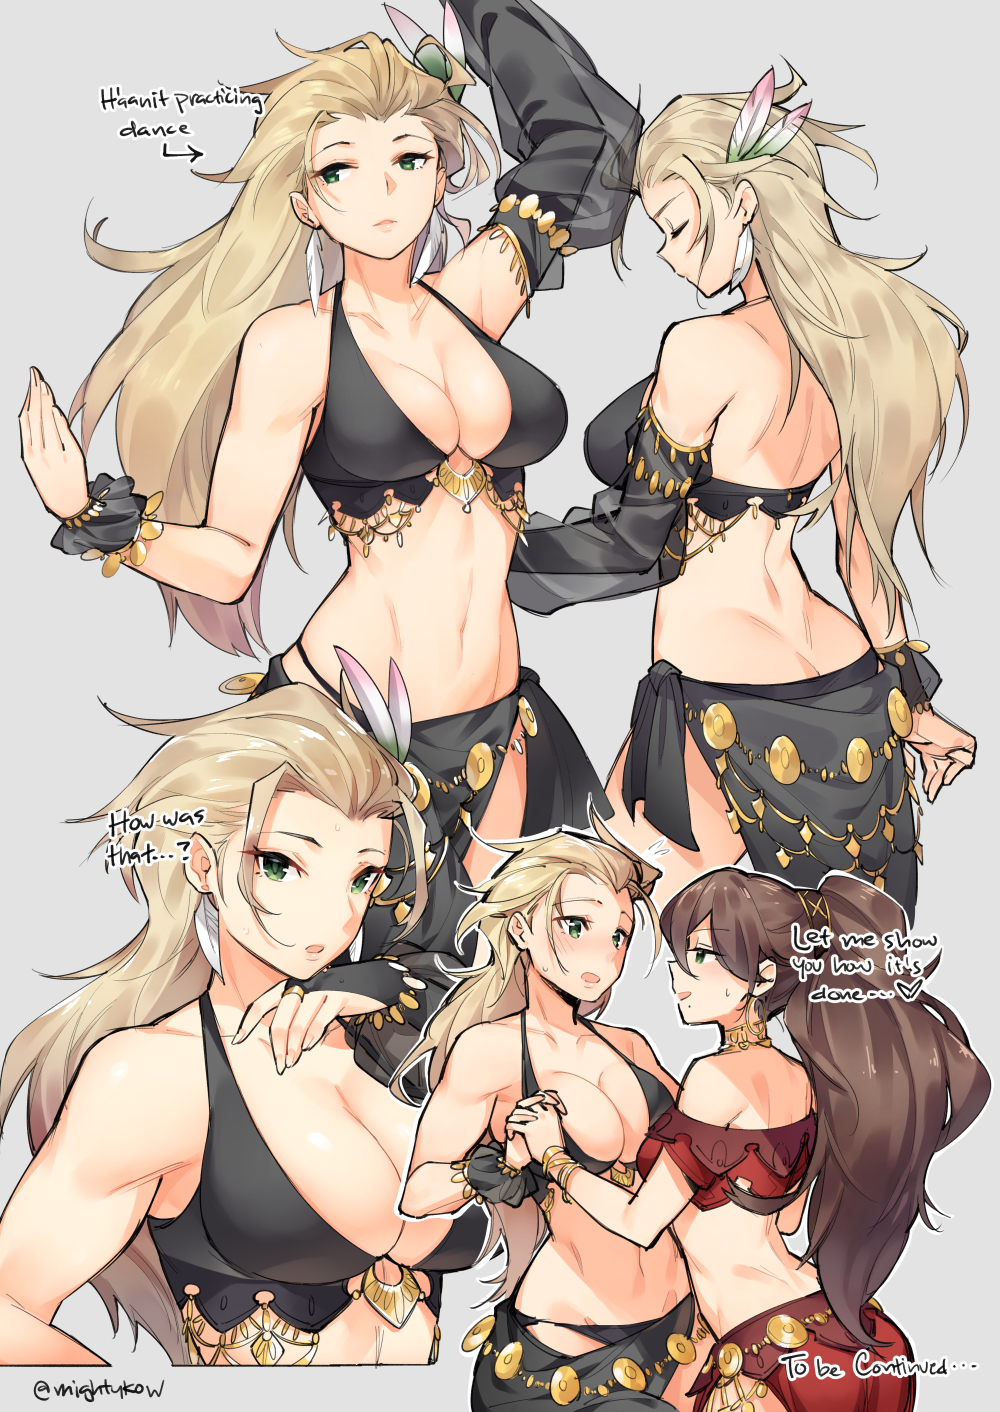 2girls arms_up ass black_dress blonde_hair breasts brown_hair chain dancer dress expressionless feathers gebyy-terar gold_bracelet gold_chain green_eyes h'aanit_(octopath_traveler) hair_pulled_back highres holding_hands large_breasts lips multiple_girls multiple_views navel no_bangs octopath_traveler ponytail primrose_azelhart red_dress to_be_continued wristband yuri